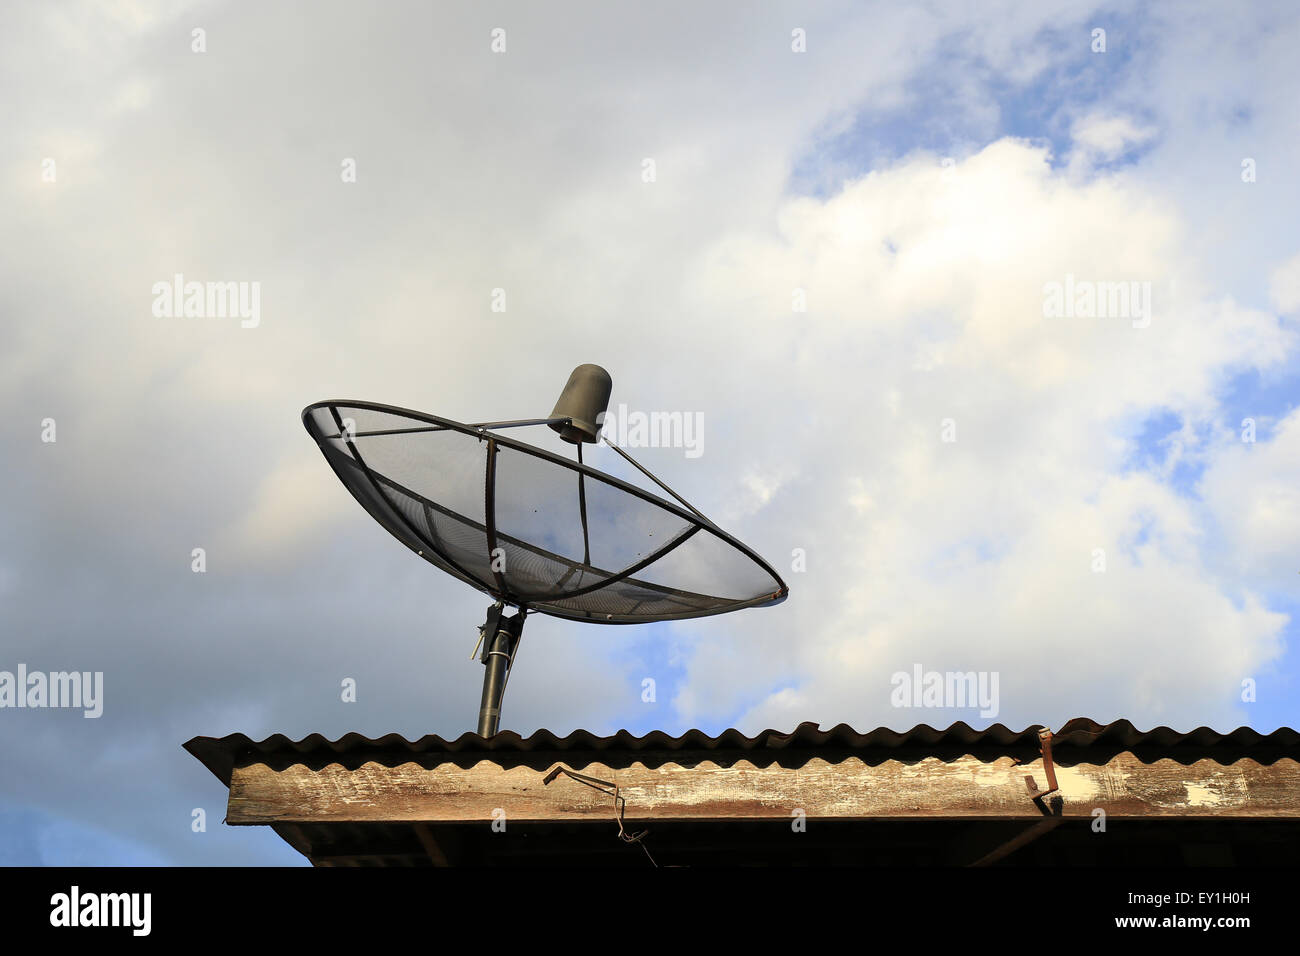 Satellite dish with blue sky and cloud background Stock Photo